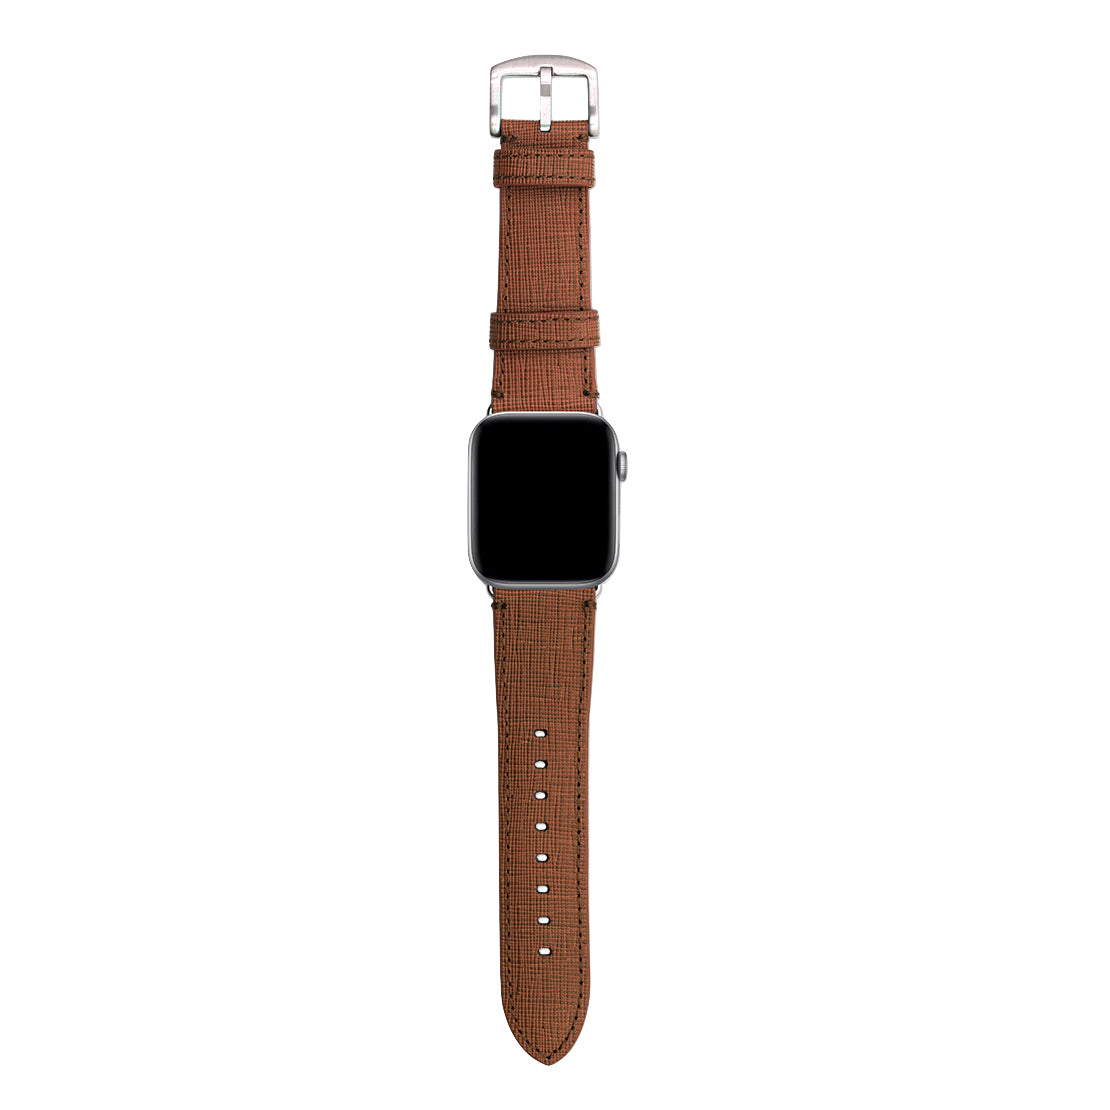 Genuine Leather Saffiano Pattern Handcrafted Apple Watch Band-Watch Band- phone case - phone cases- phone cover- iphone cover- iphone case- iphone cases- leather case- leather cases- DIYCASE - custom case - leather cover - hand strap case - croco pattern case - snake pattern case - carbon fiber phone case - phone case brand - unique phone case - high quality - phone case brand - protective case - buy phone case hong kong - online buy phone case - iphone‎手機殼 - 客製化手機殼 - samsung ‎手機殼 - 香港手機殼 - 買電話殼